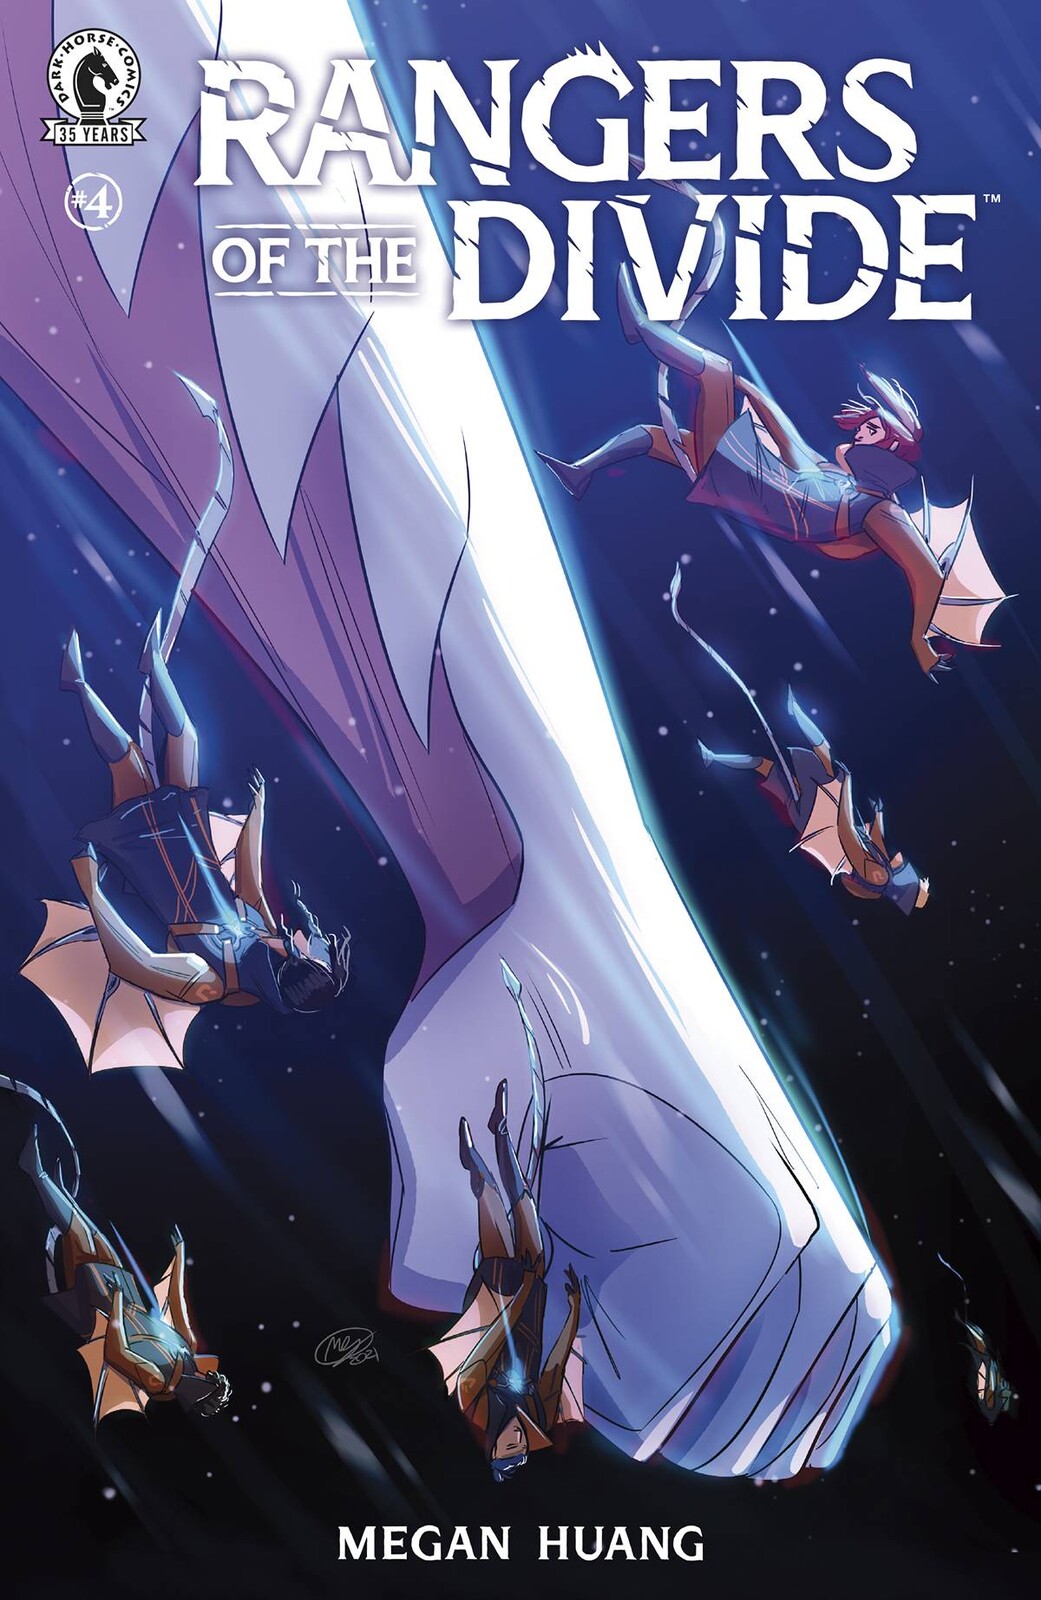 Rangers of the Divide #4 cover (official)